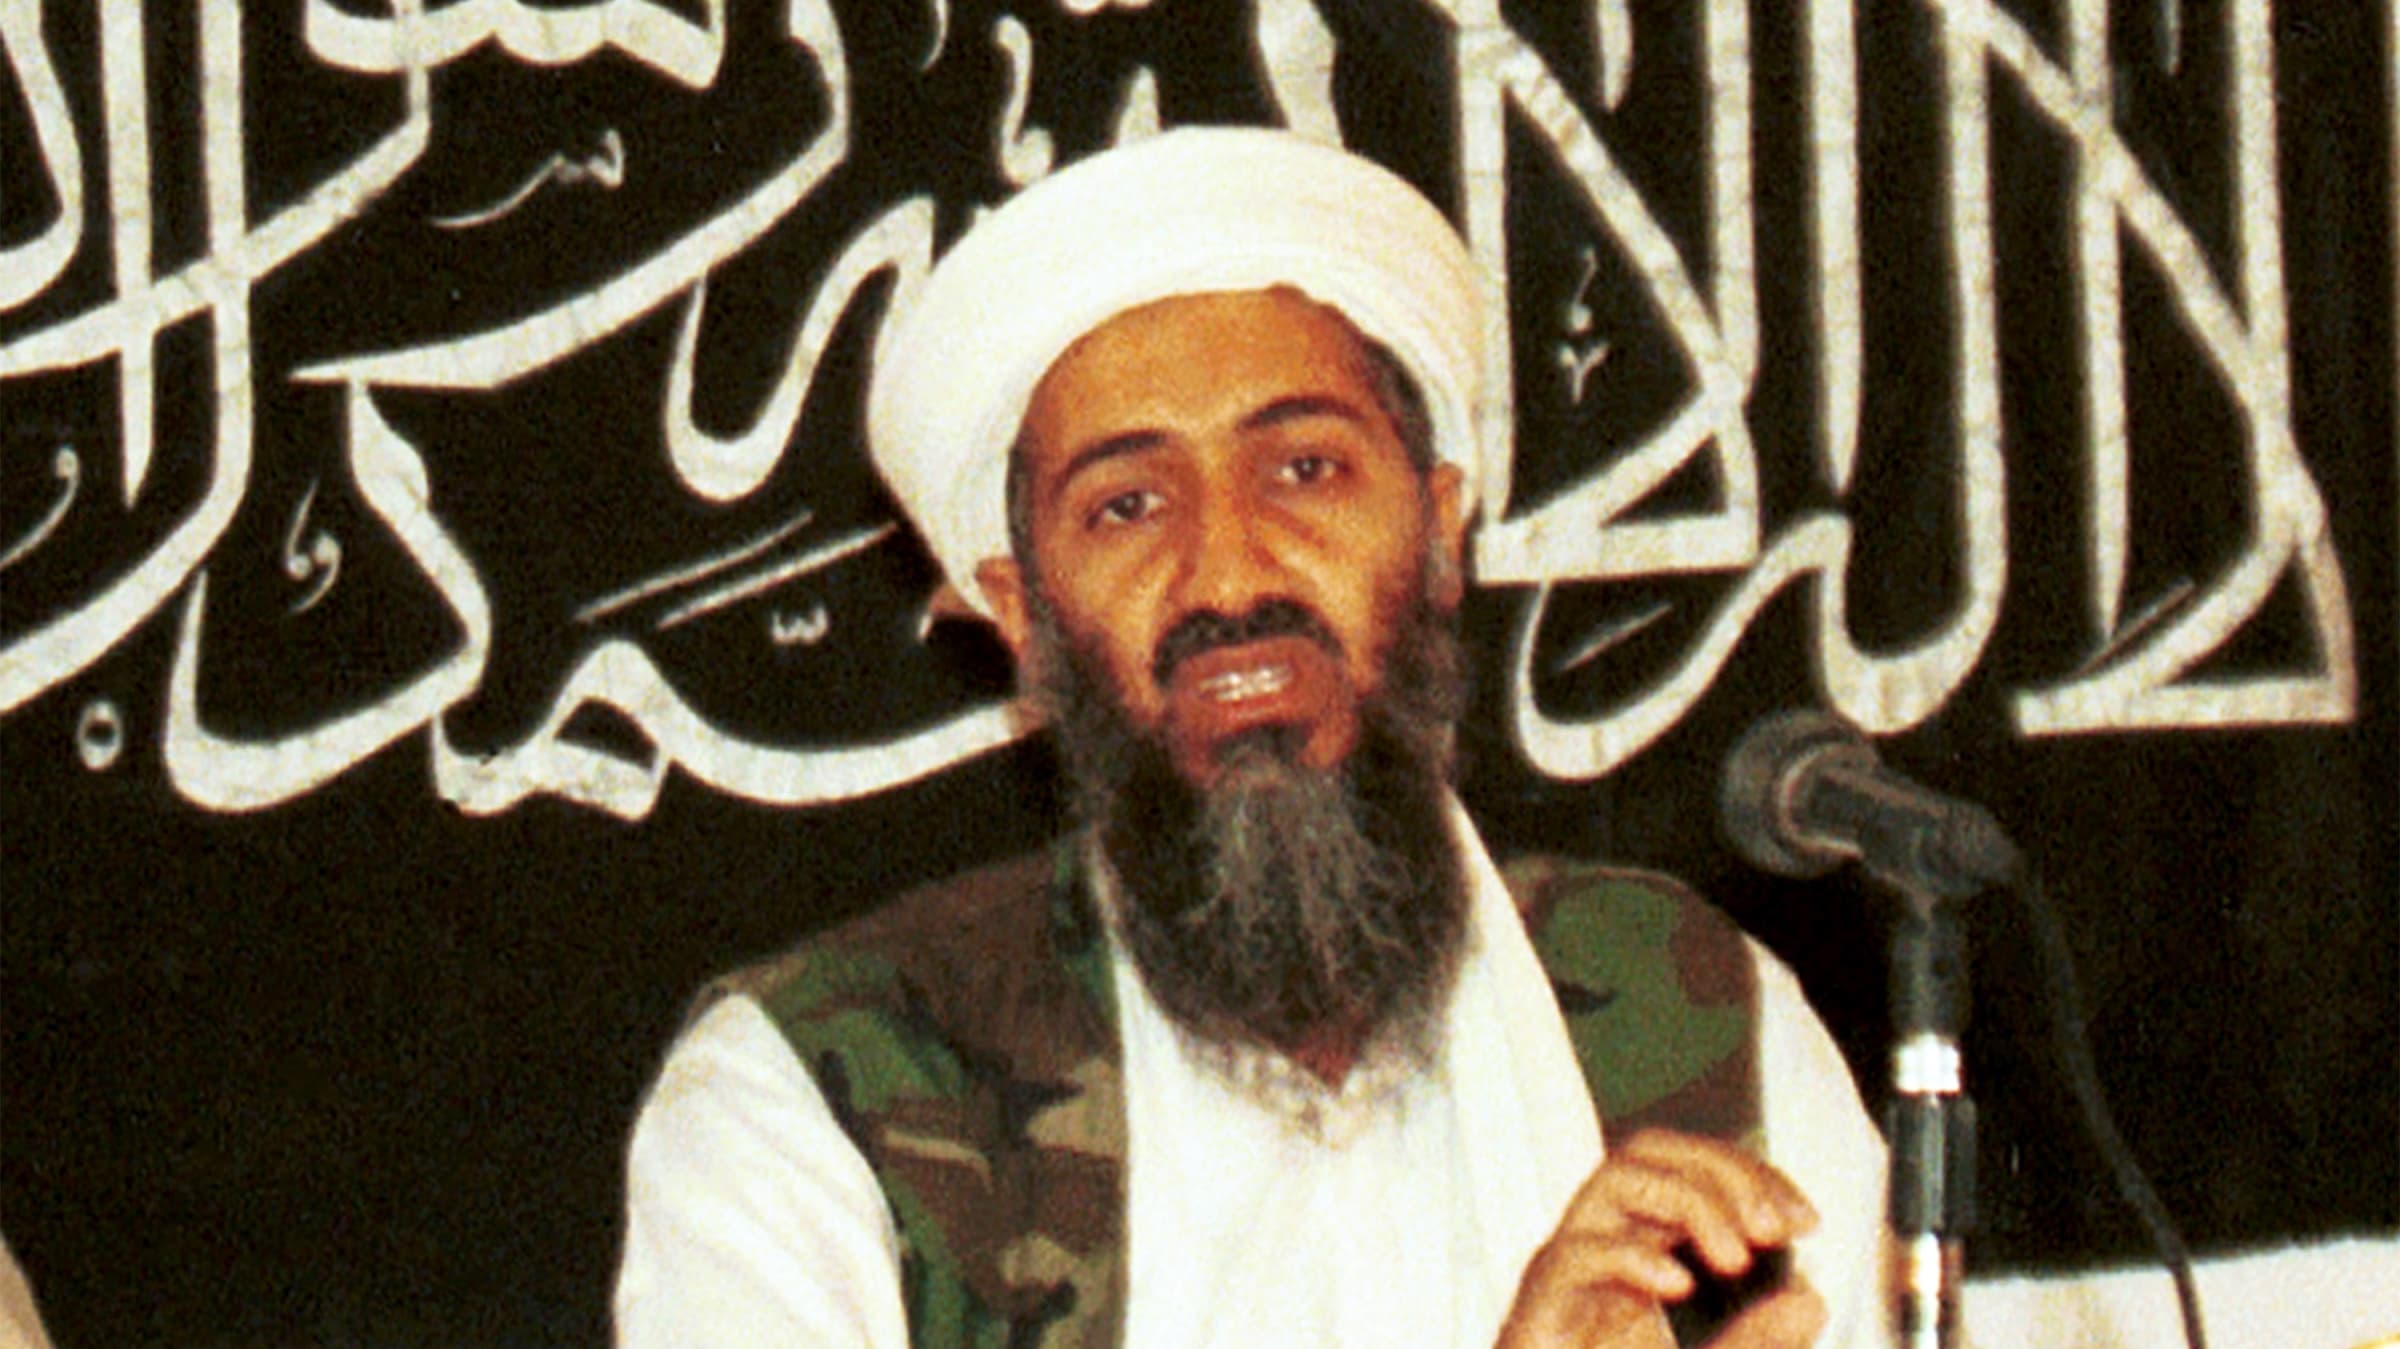 Bin Laden was obsessed with media, public image